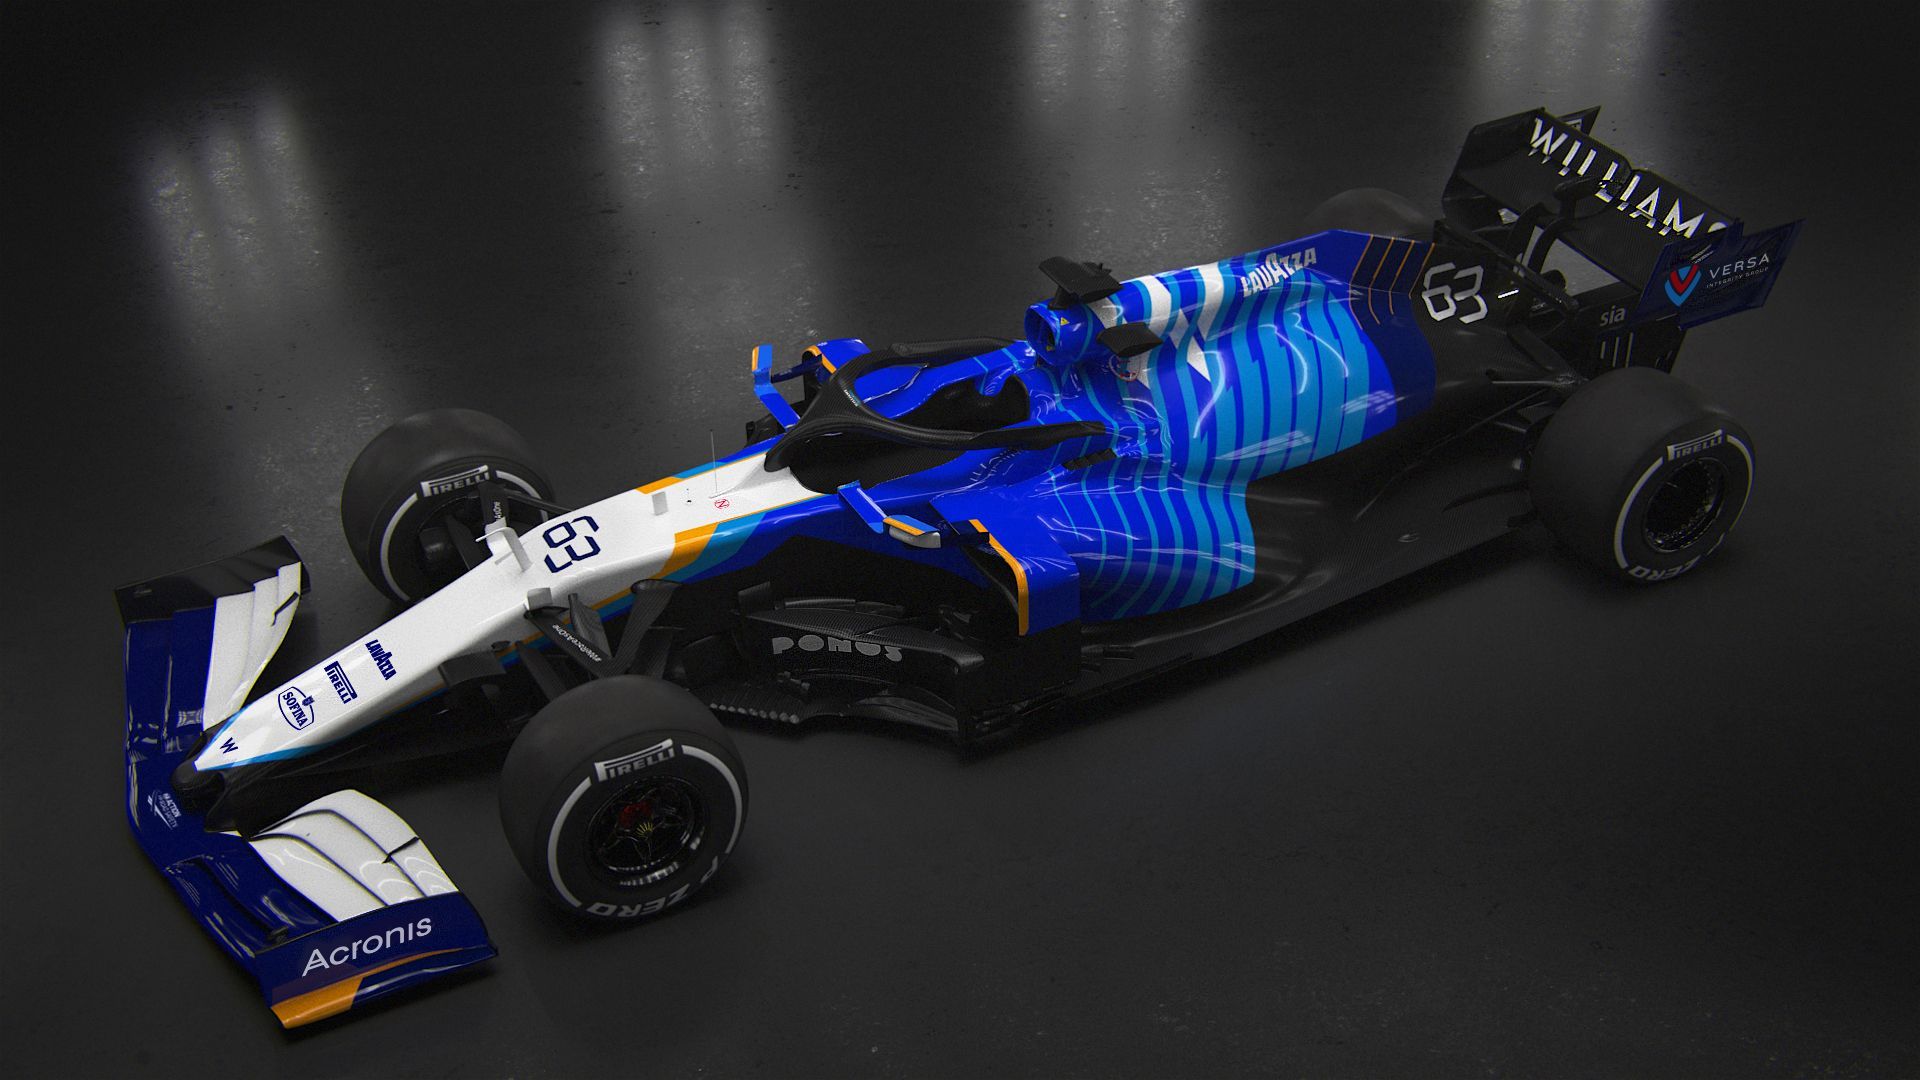 Williams presents new 2021 F1 livery with Russell and Latifi